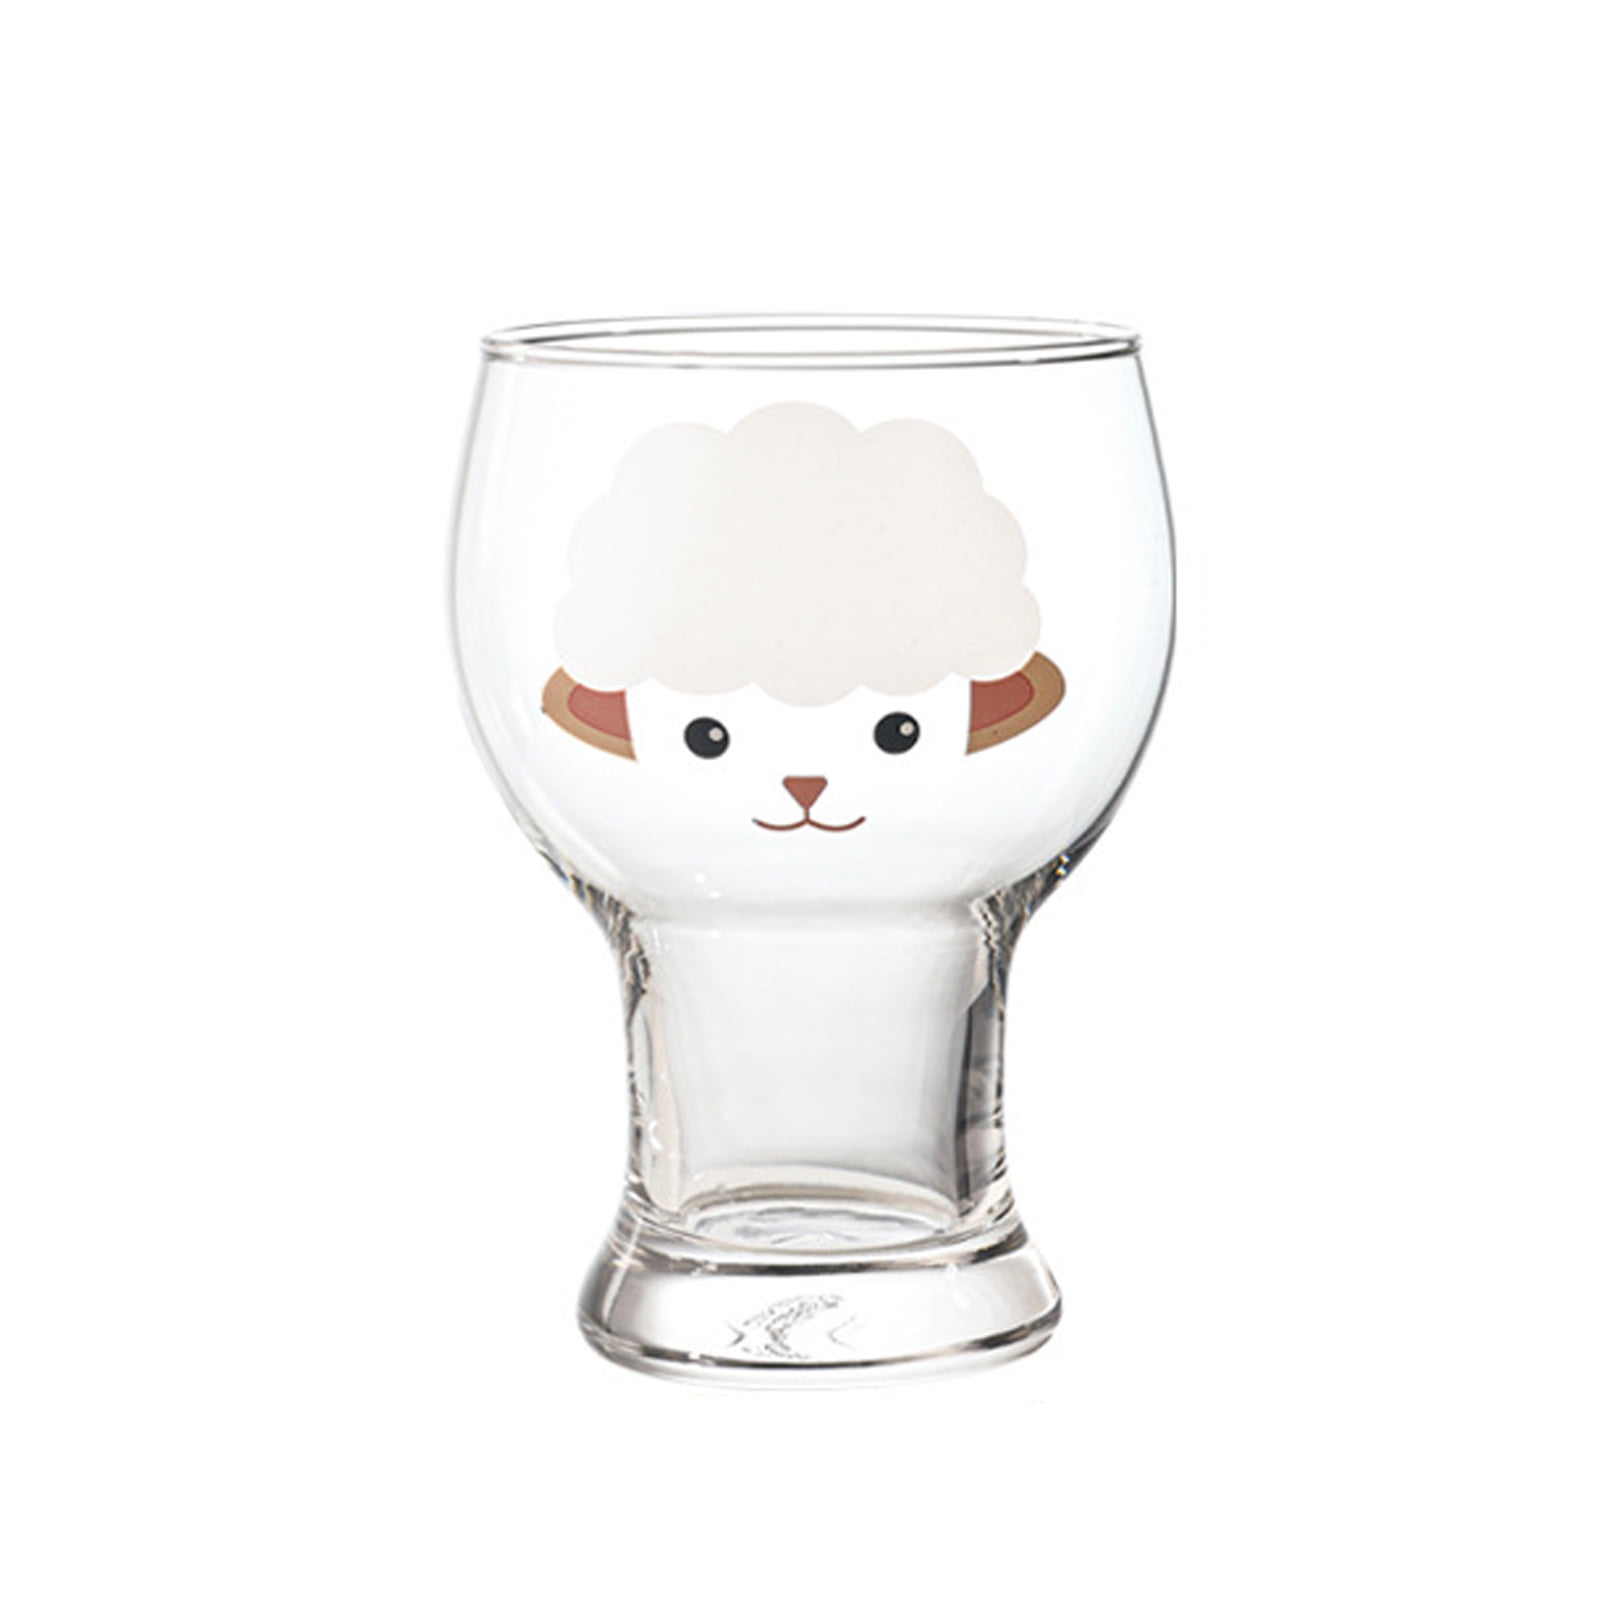 Goblet Glass Cup Transparent Home Decoration Gift Cute Cartoon Water Cup -  